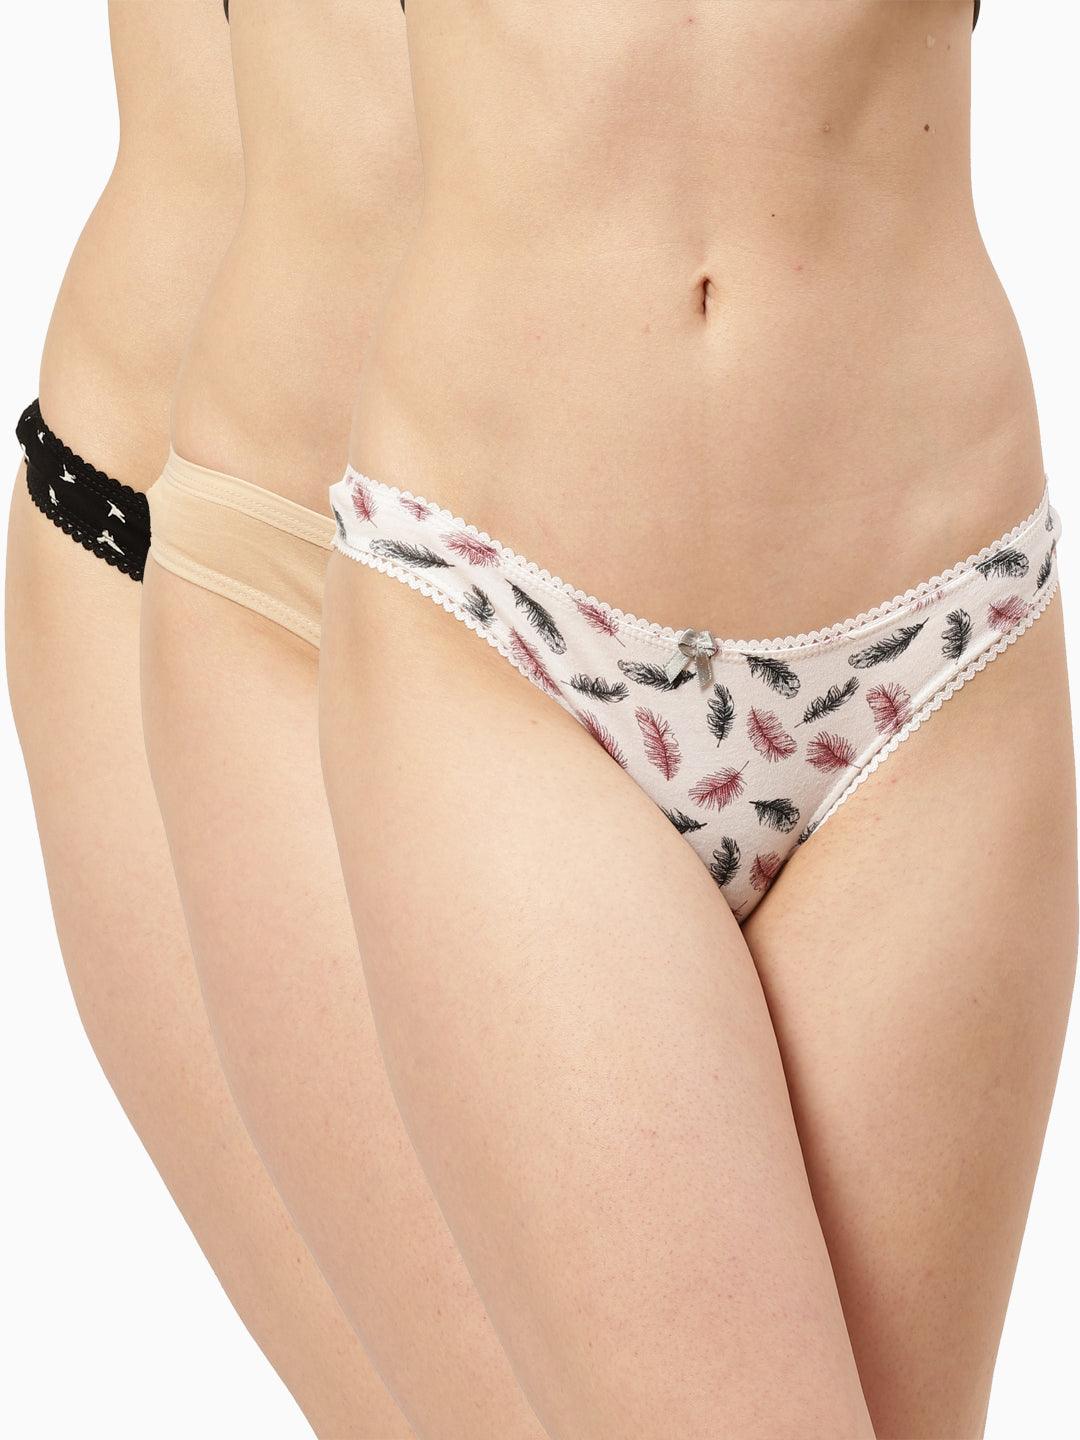 Sunny Women Premium Panty Give The Best Comfort And Feel .